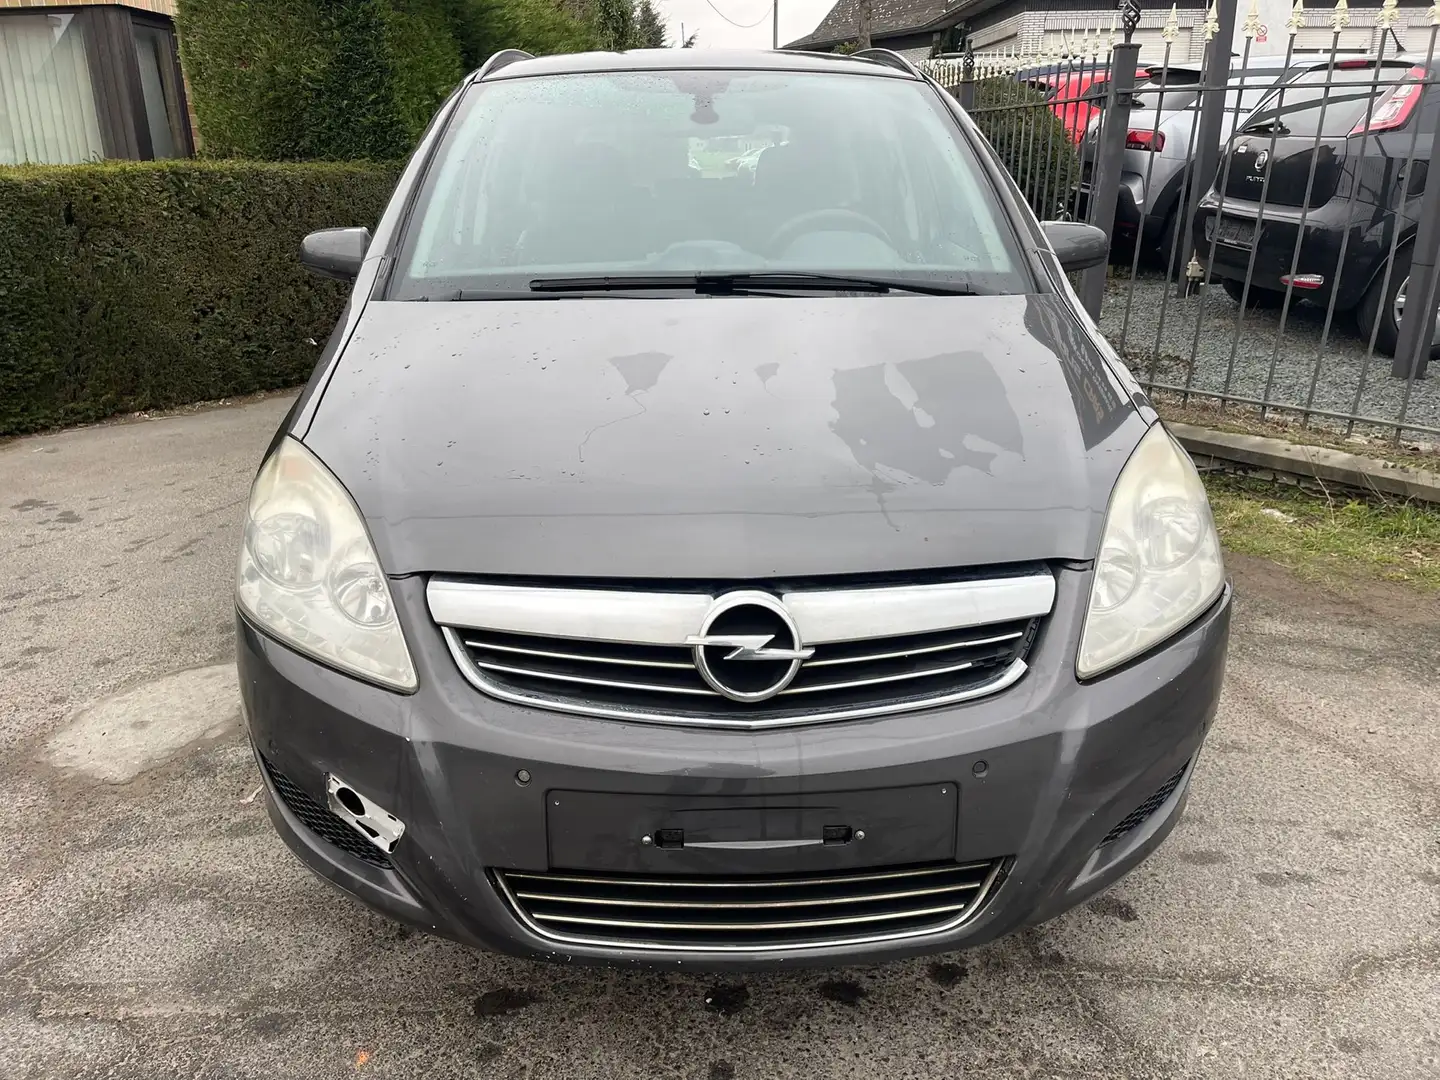 Opel Zafira 1.7 CDTi - Climatisation- 7 places- cruise control Gris - 2